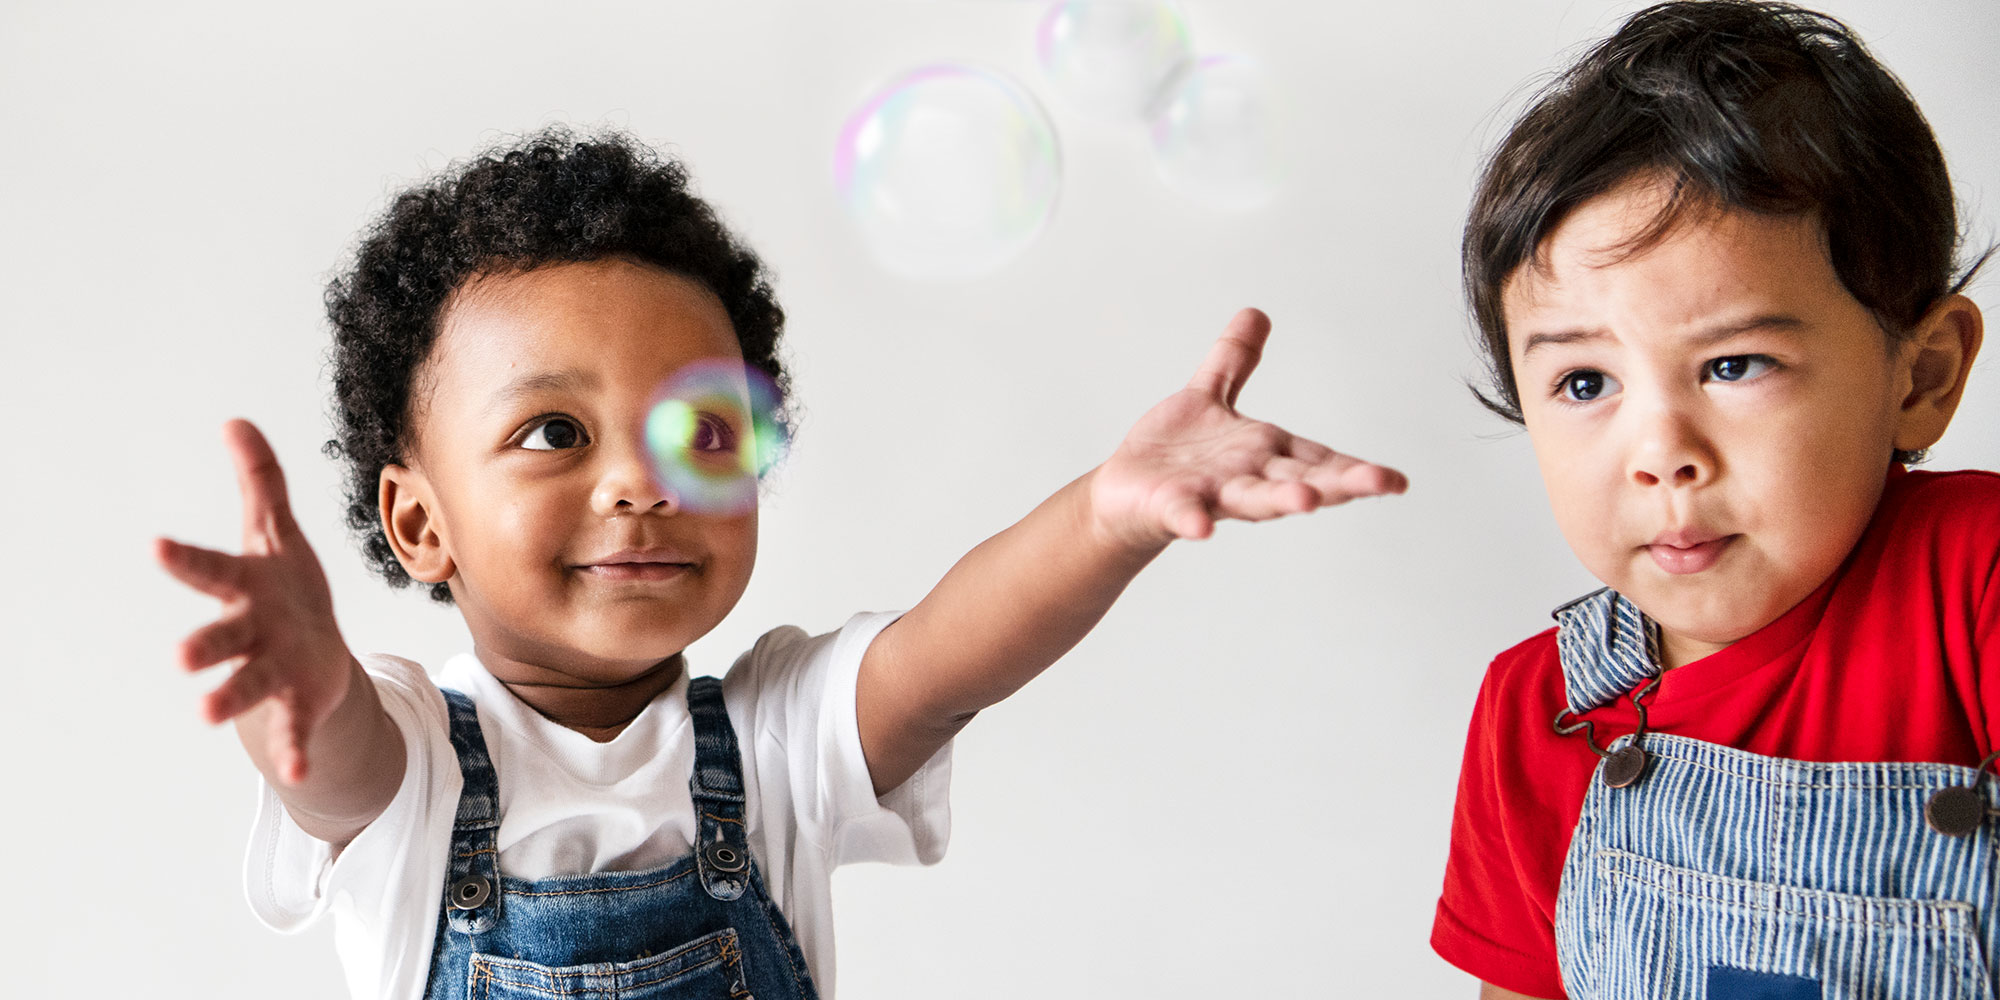 Two boys playing with bubbles